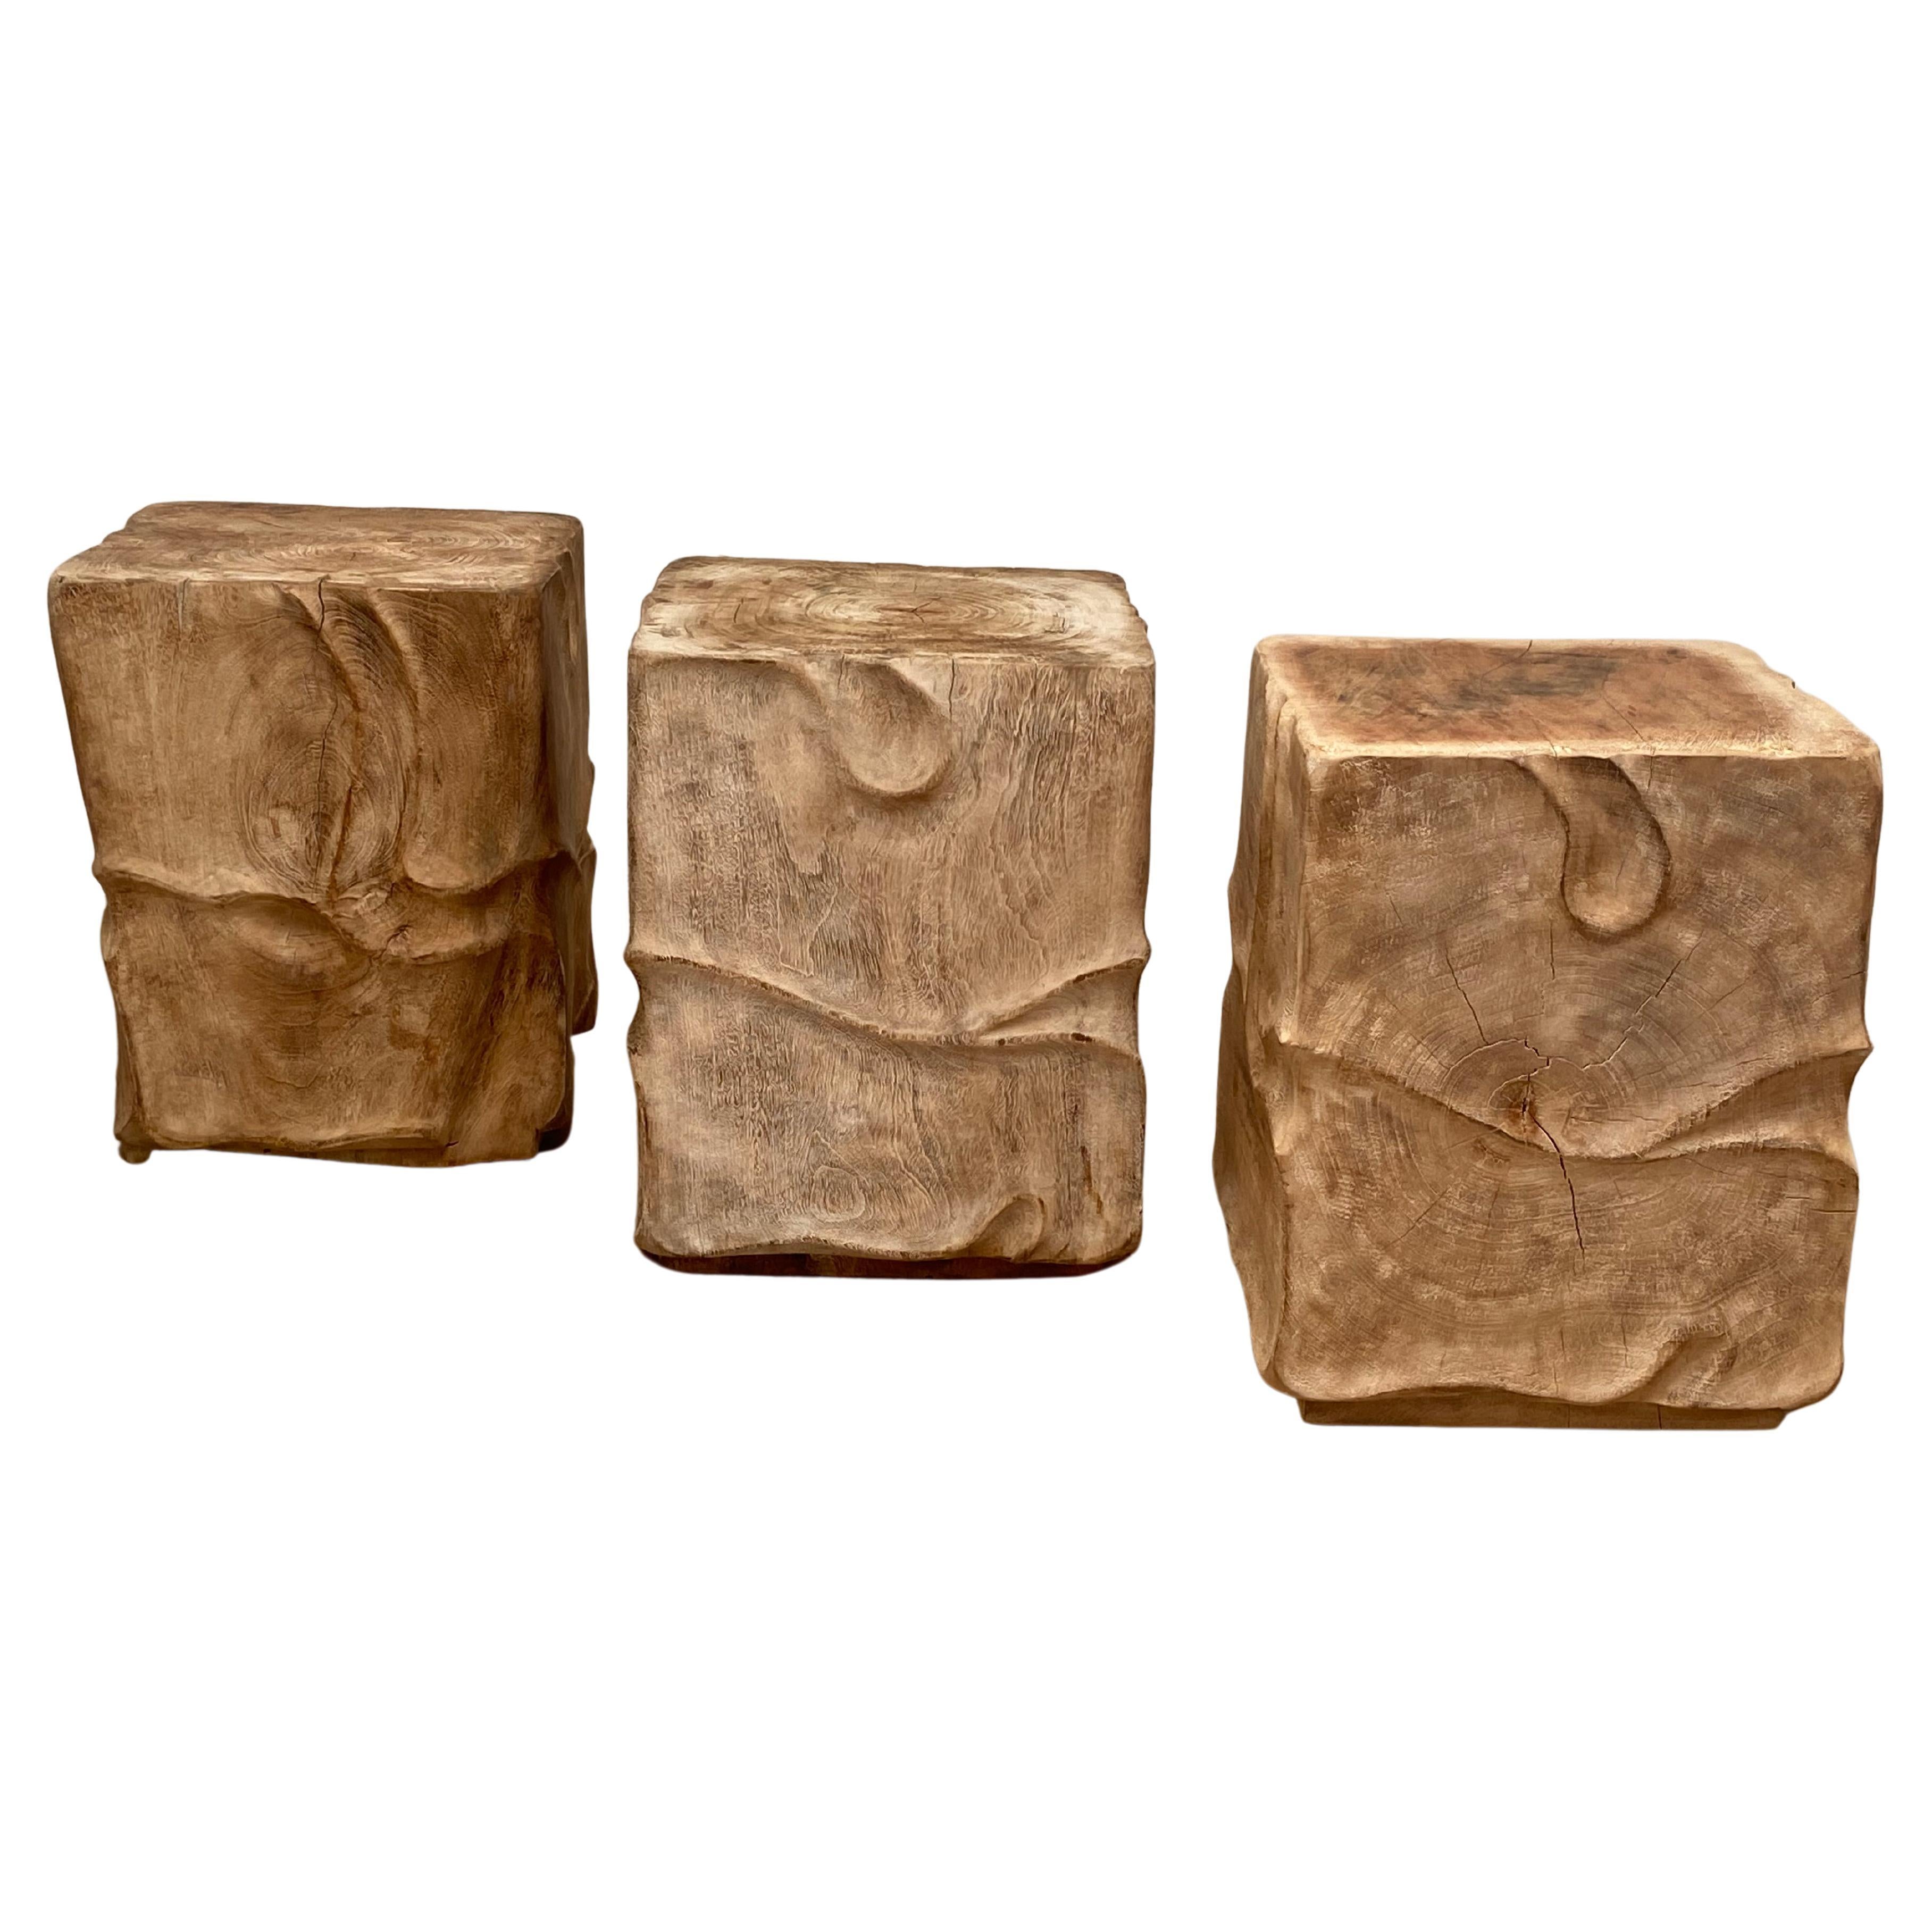  Set of 3 Rustic, Solid Wooden Blocks For Sale